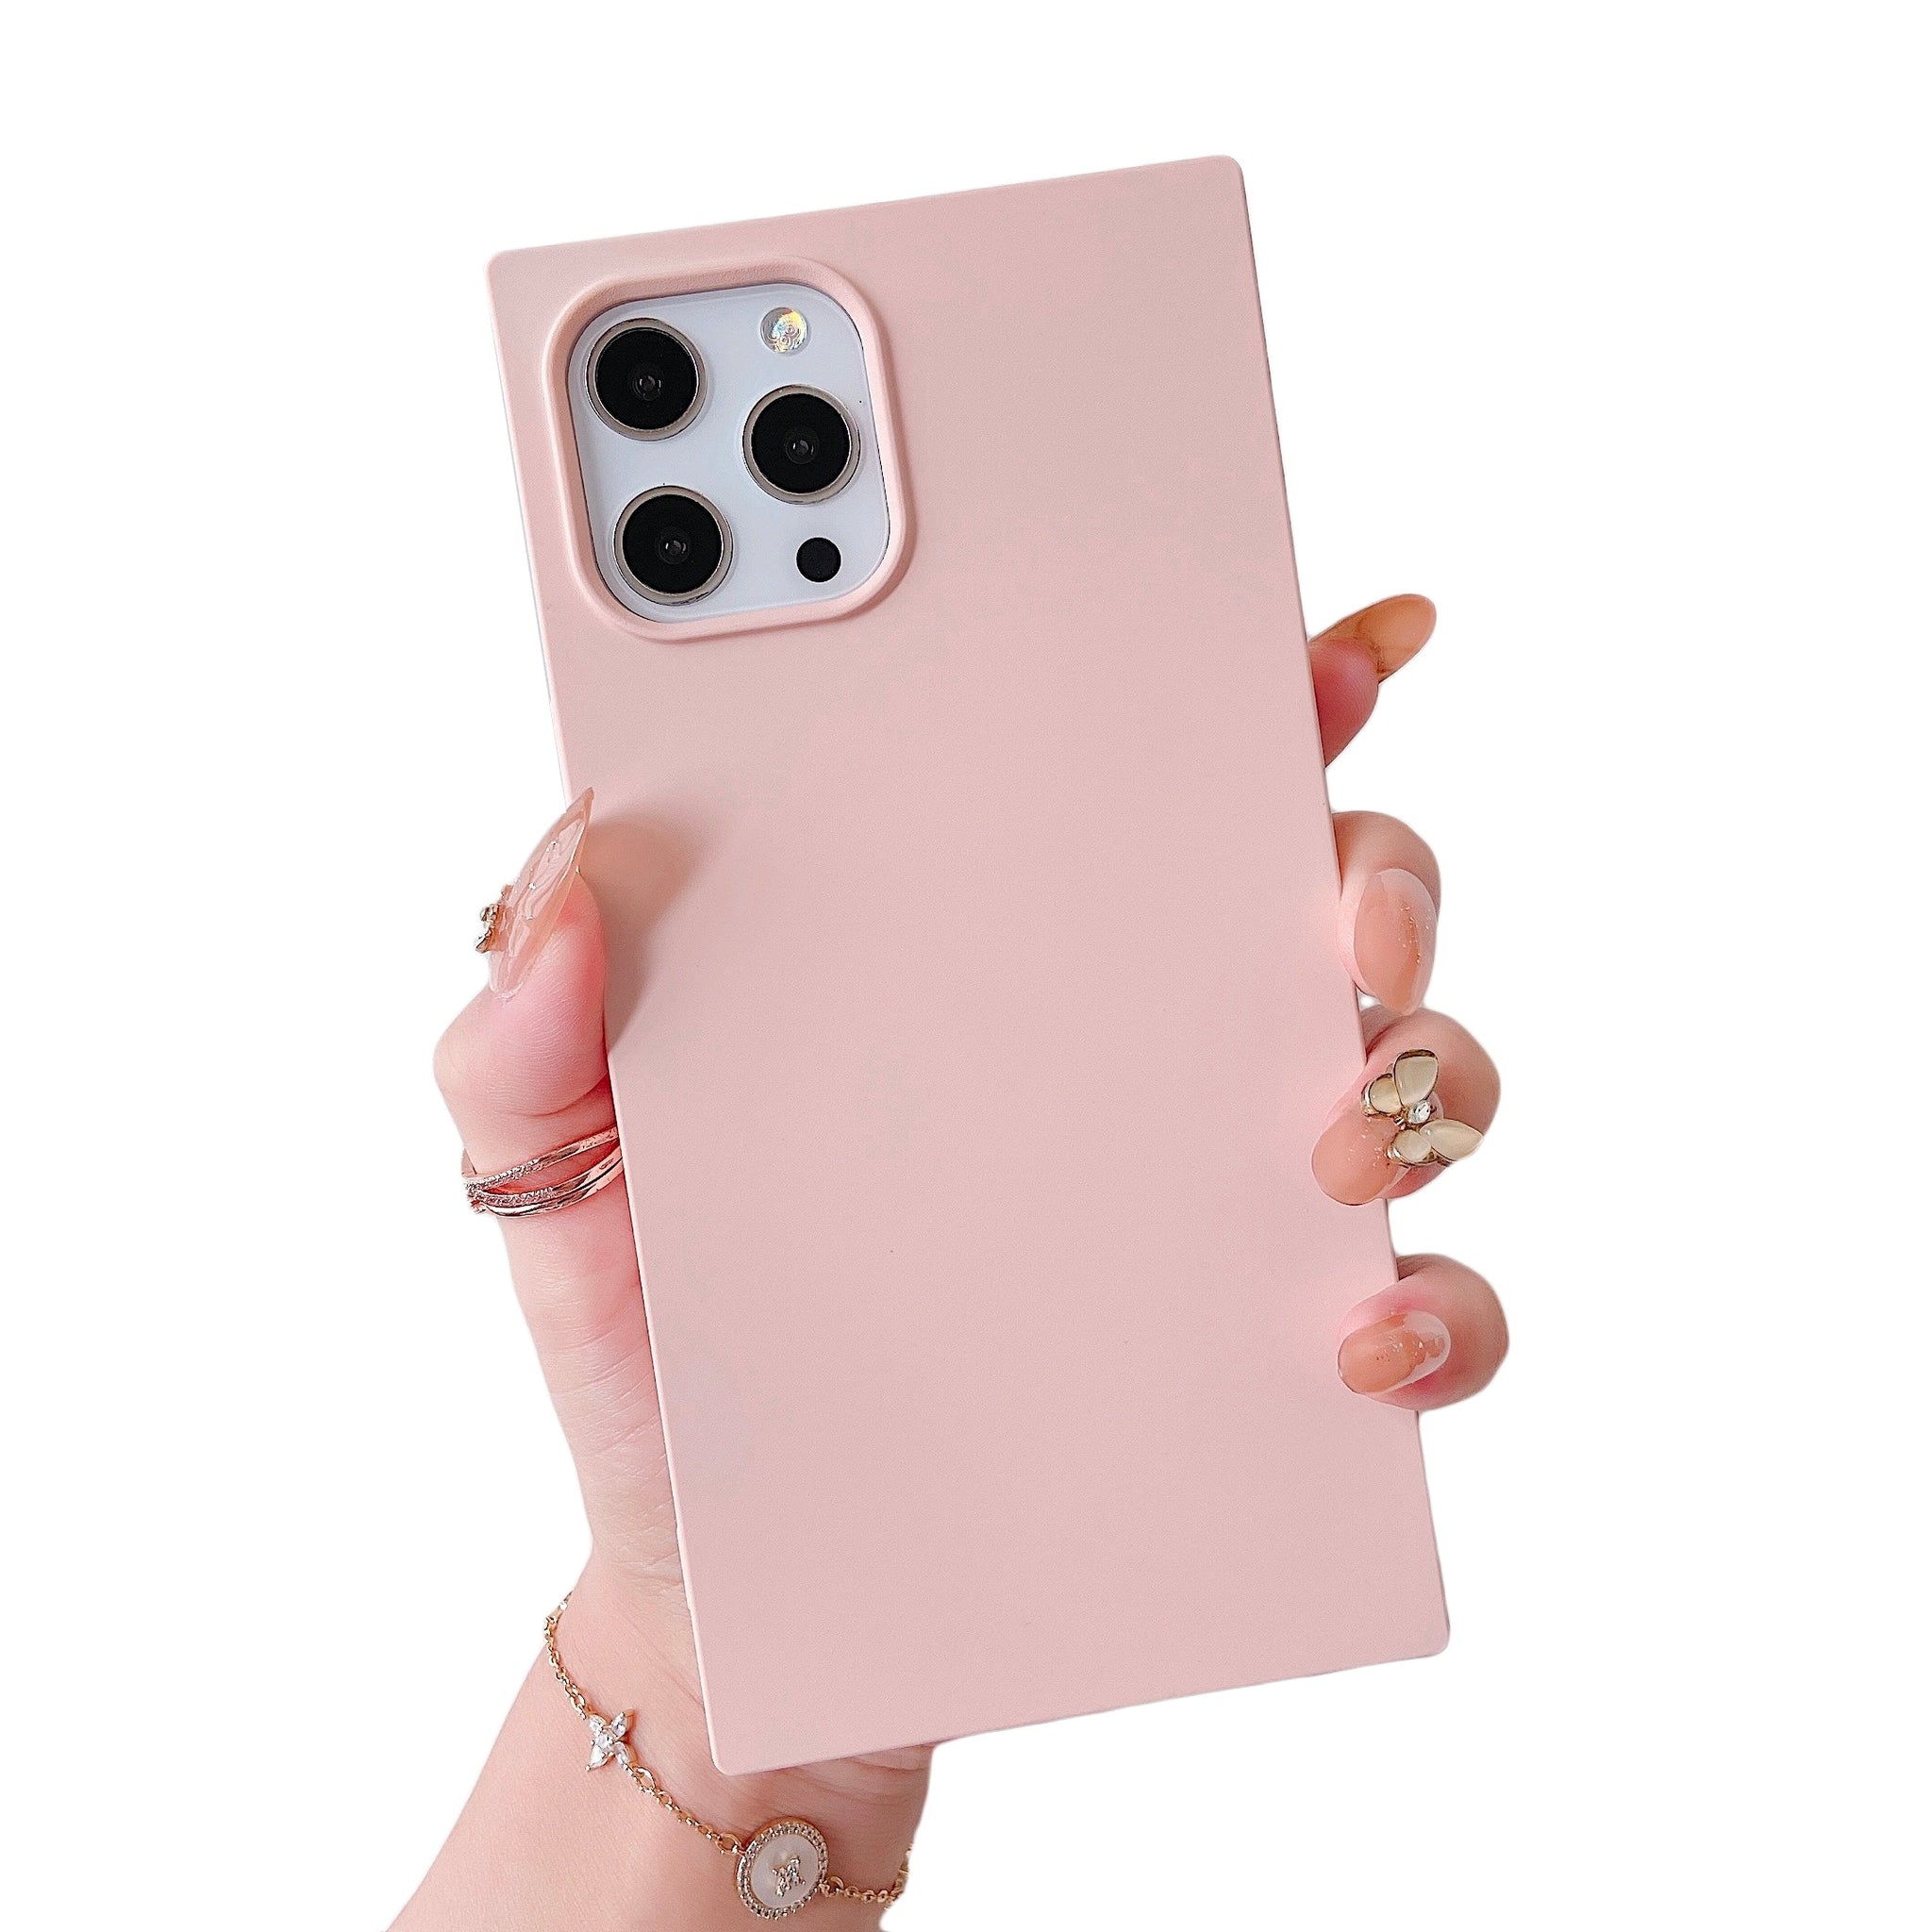 iPhone 13 Pro Max Case Square Silicone (Chalk Pink)